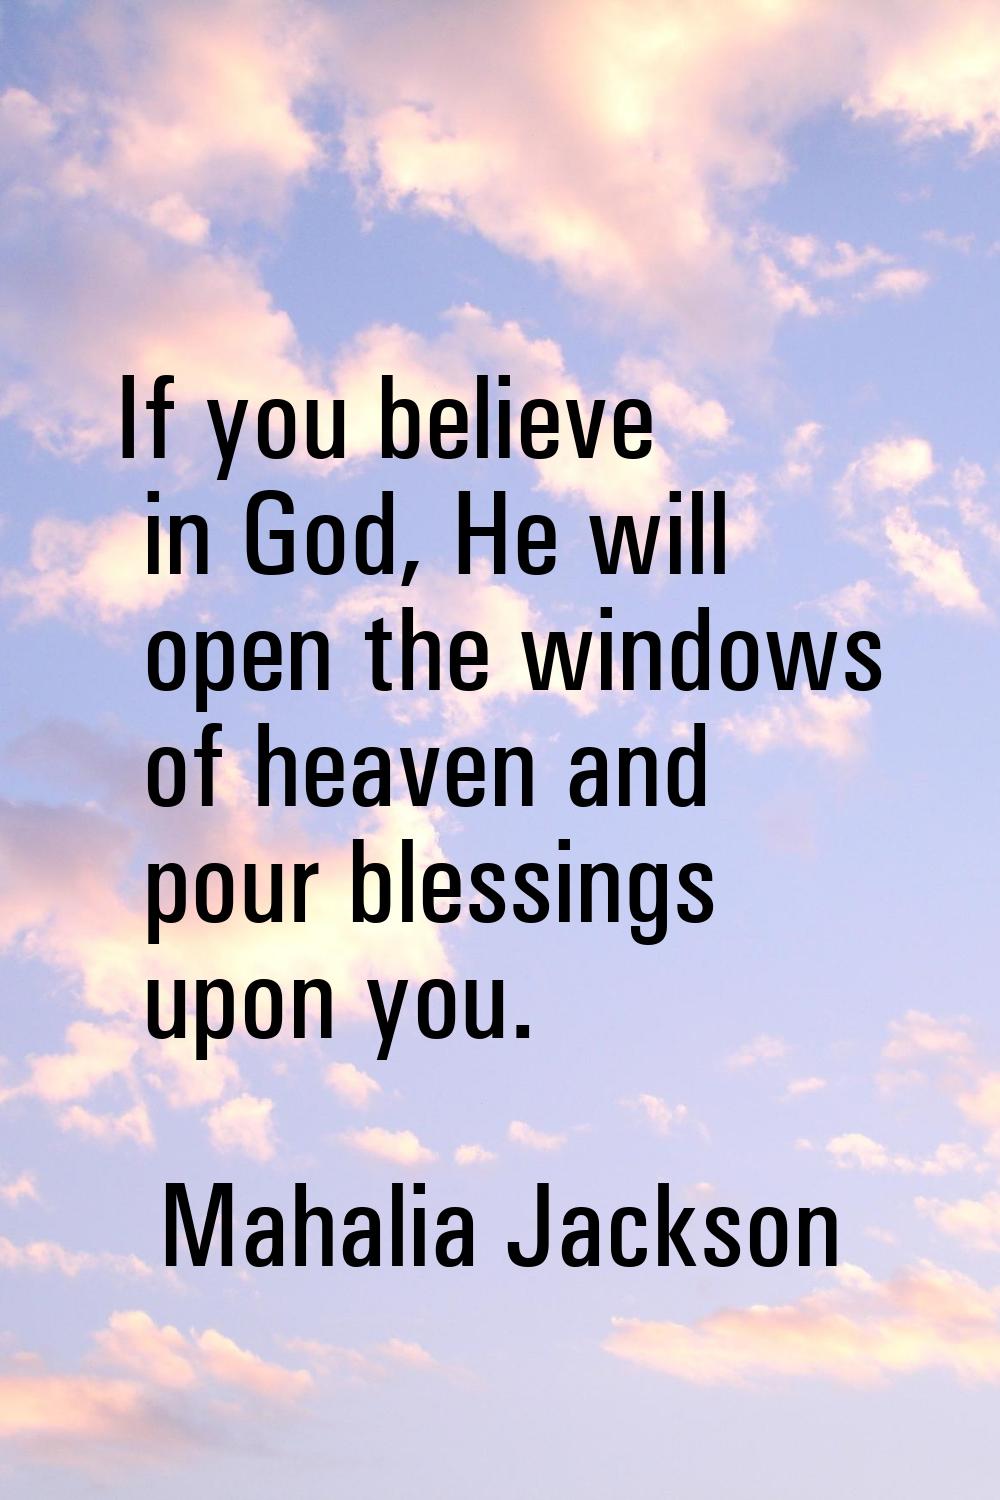 If you believe in God, He will open the windows of heaven and pour blessings upon you.